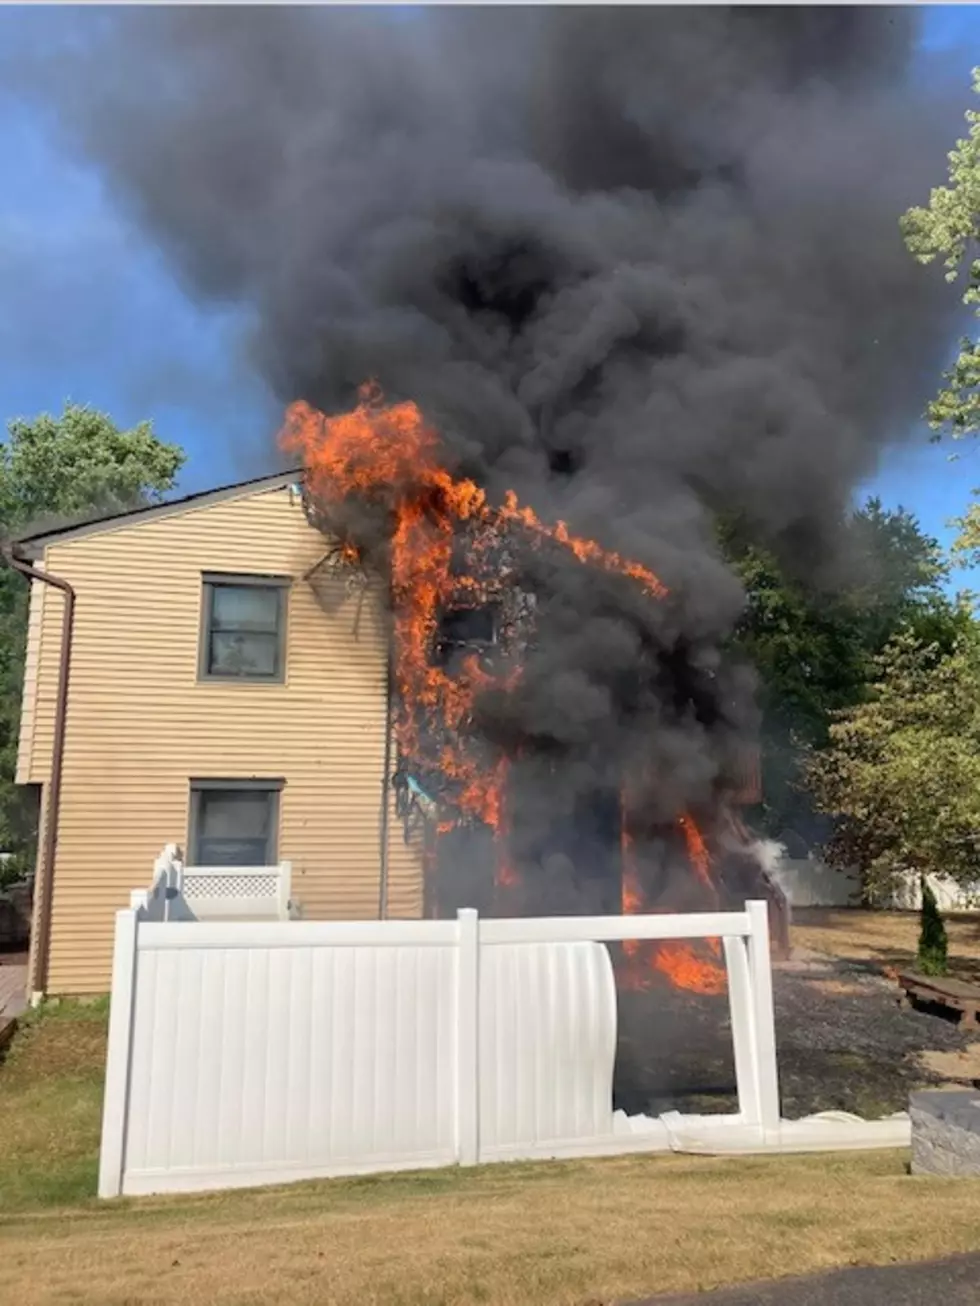 Two separate weekend fires in Marlboro remain under investigation